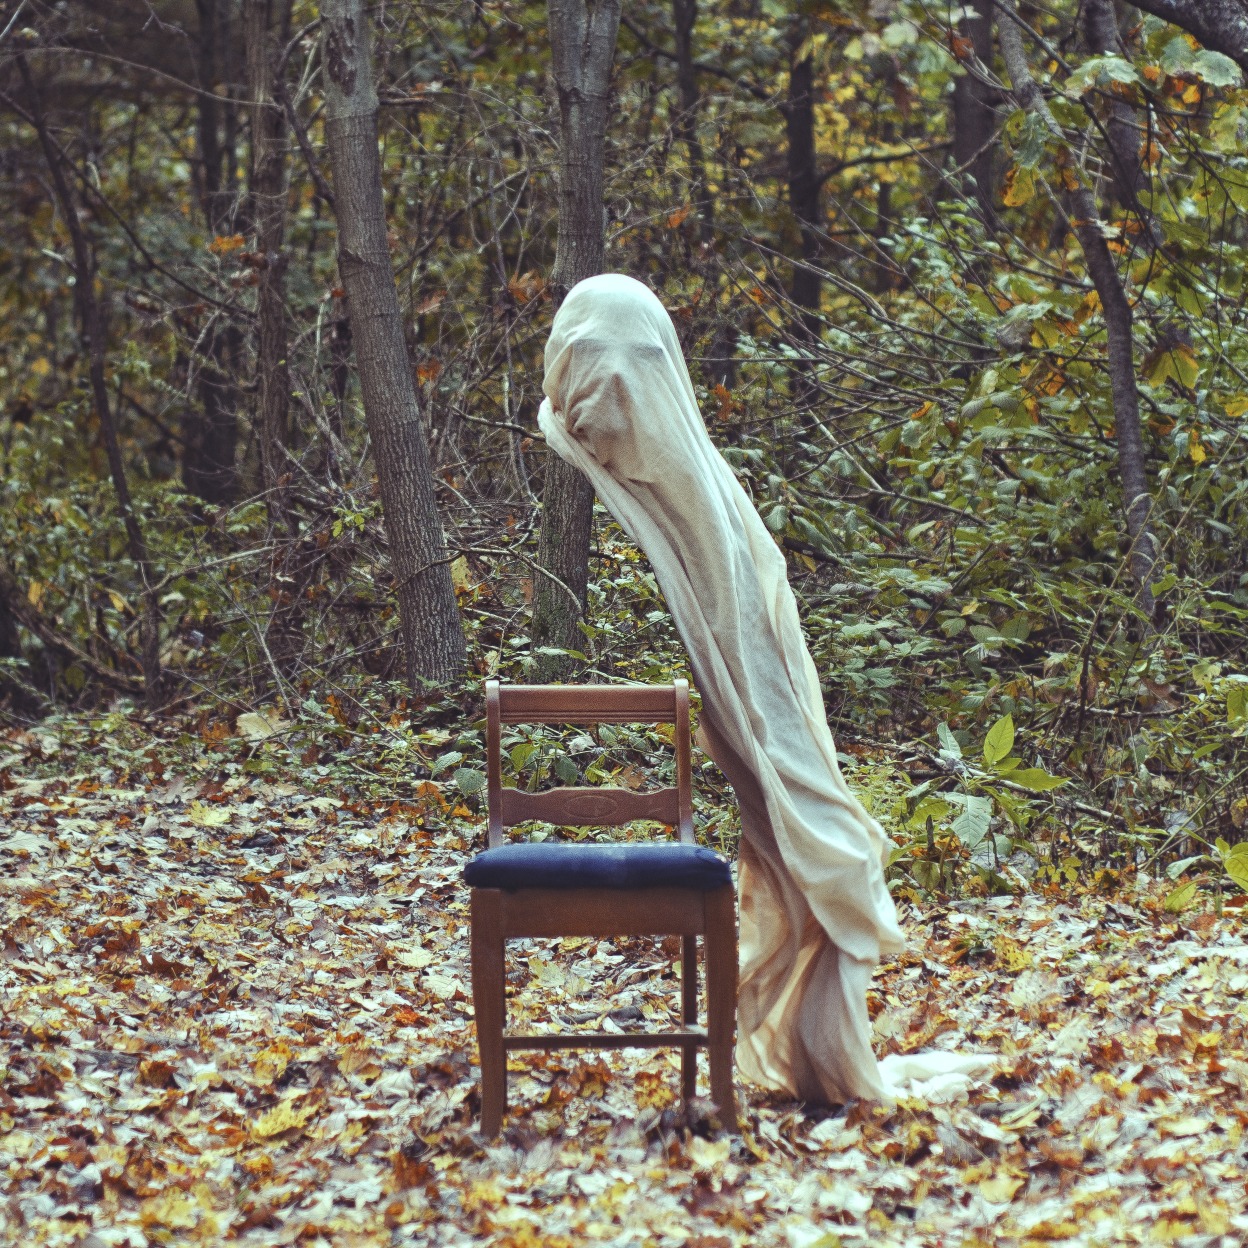 christopher mckenney photography